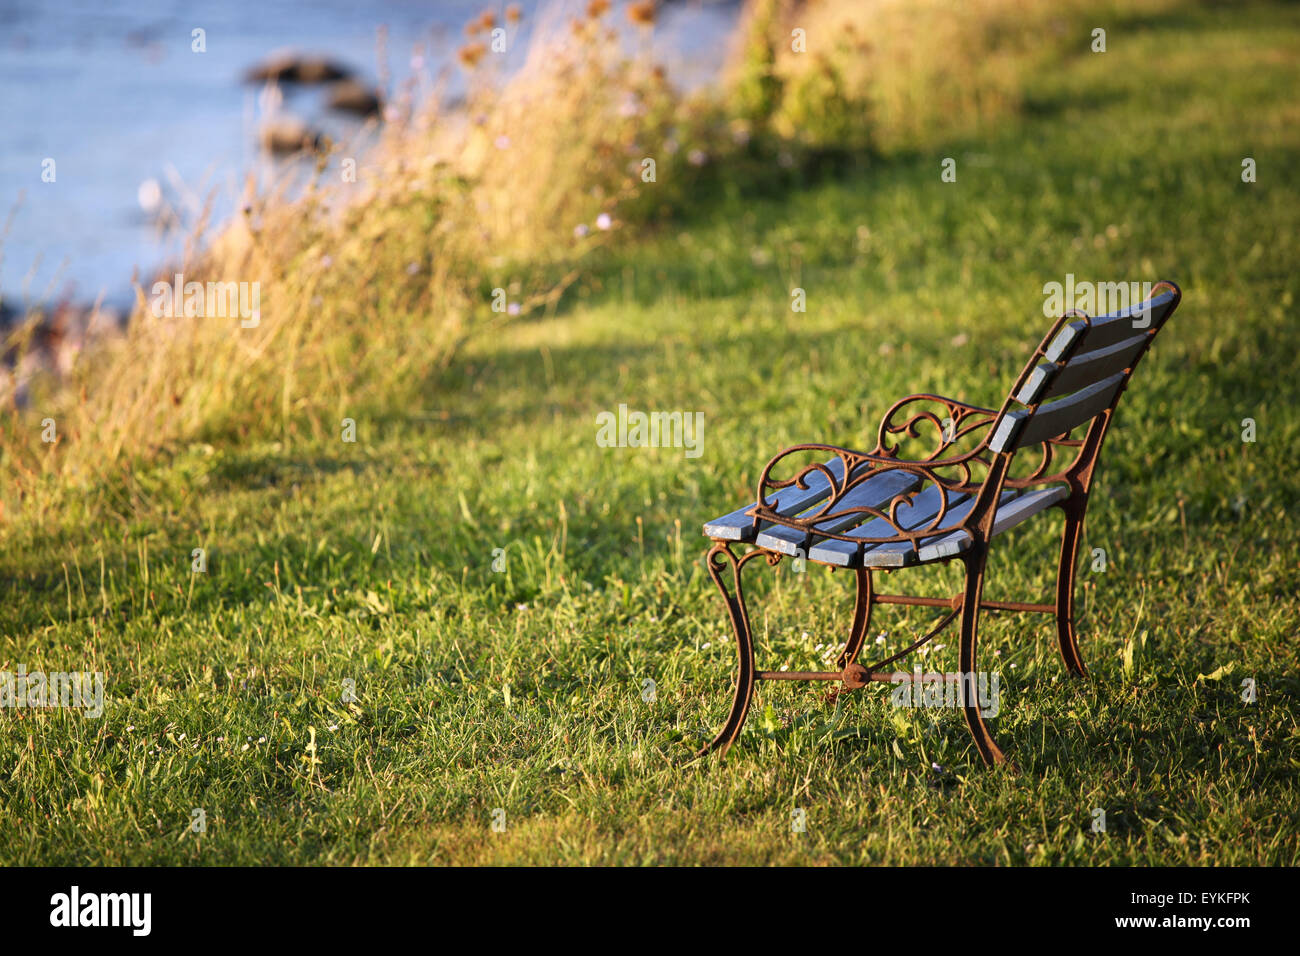 Antique bench on grass at seaside, calmness and thoughtfulness Stock Photo